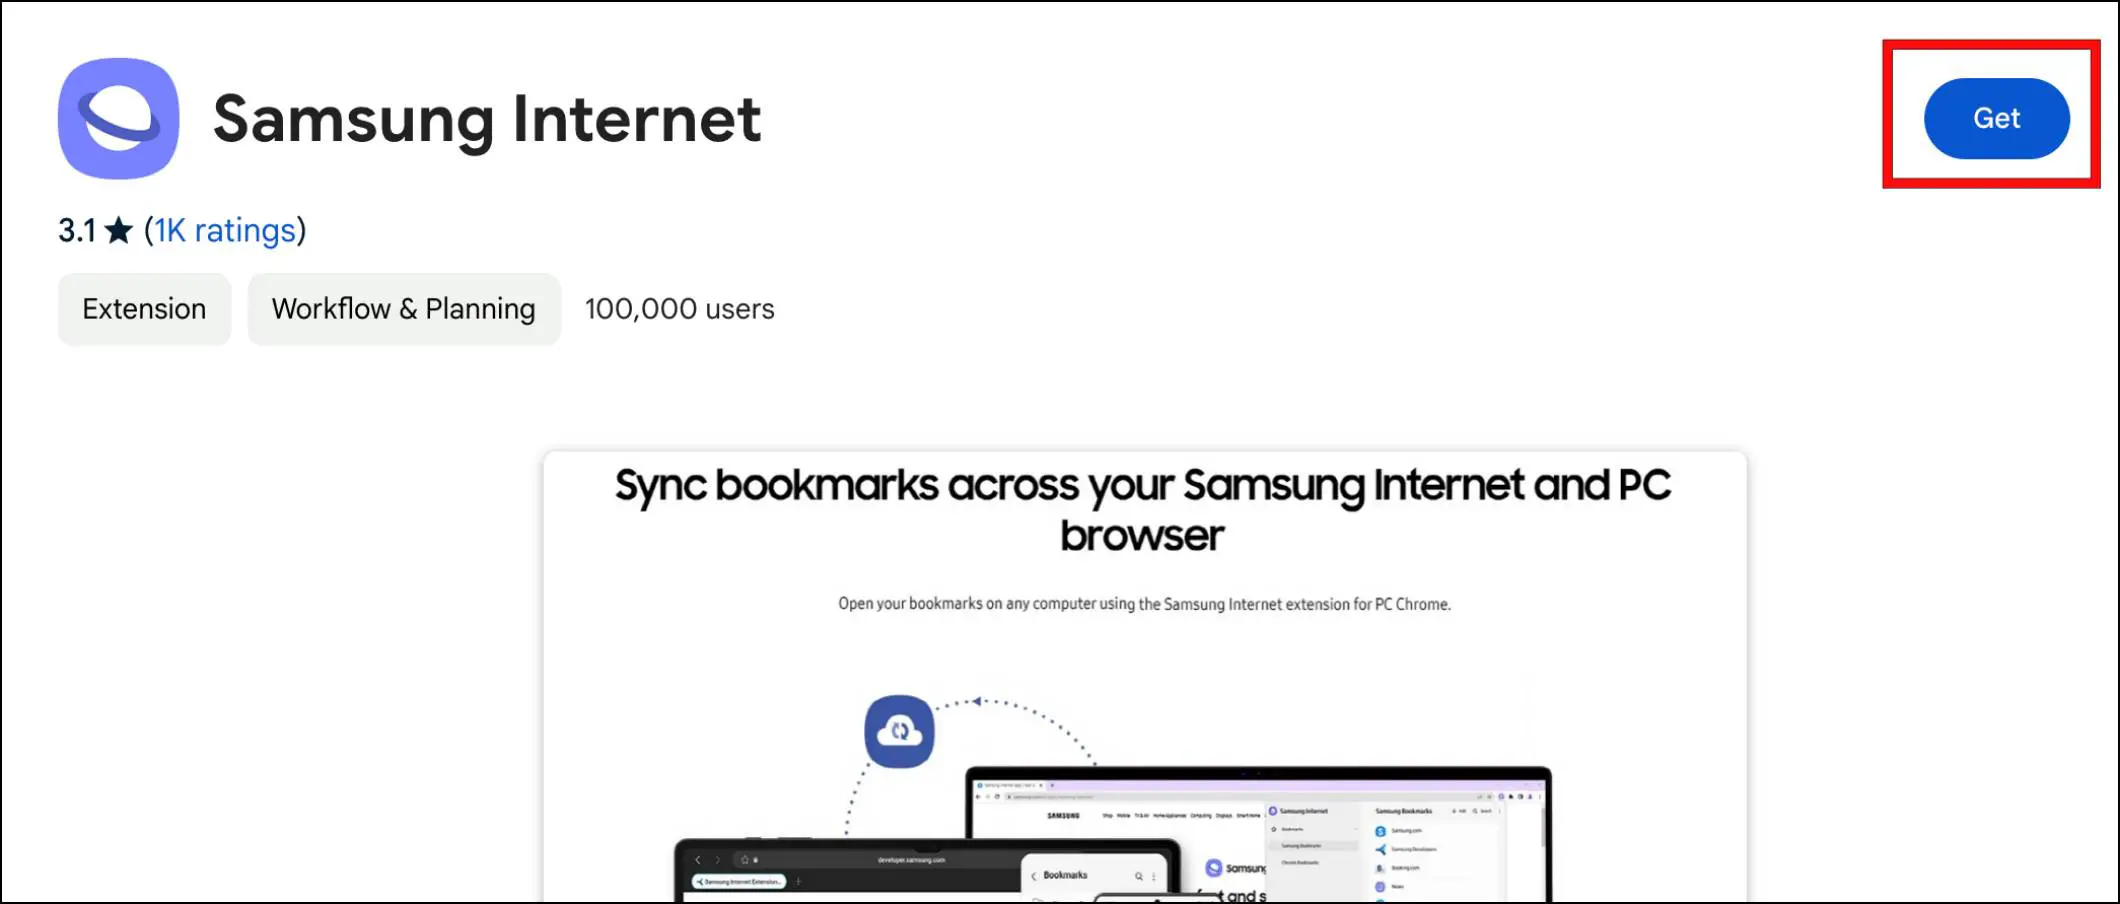 Download Samsung Internet Extension by Clicking on the Get Button